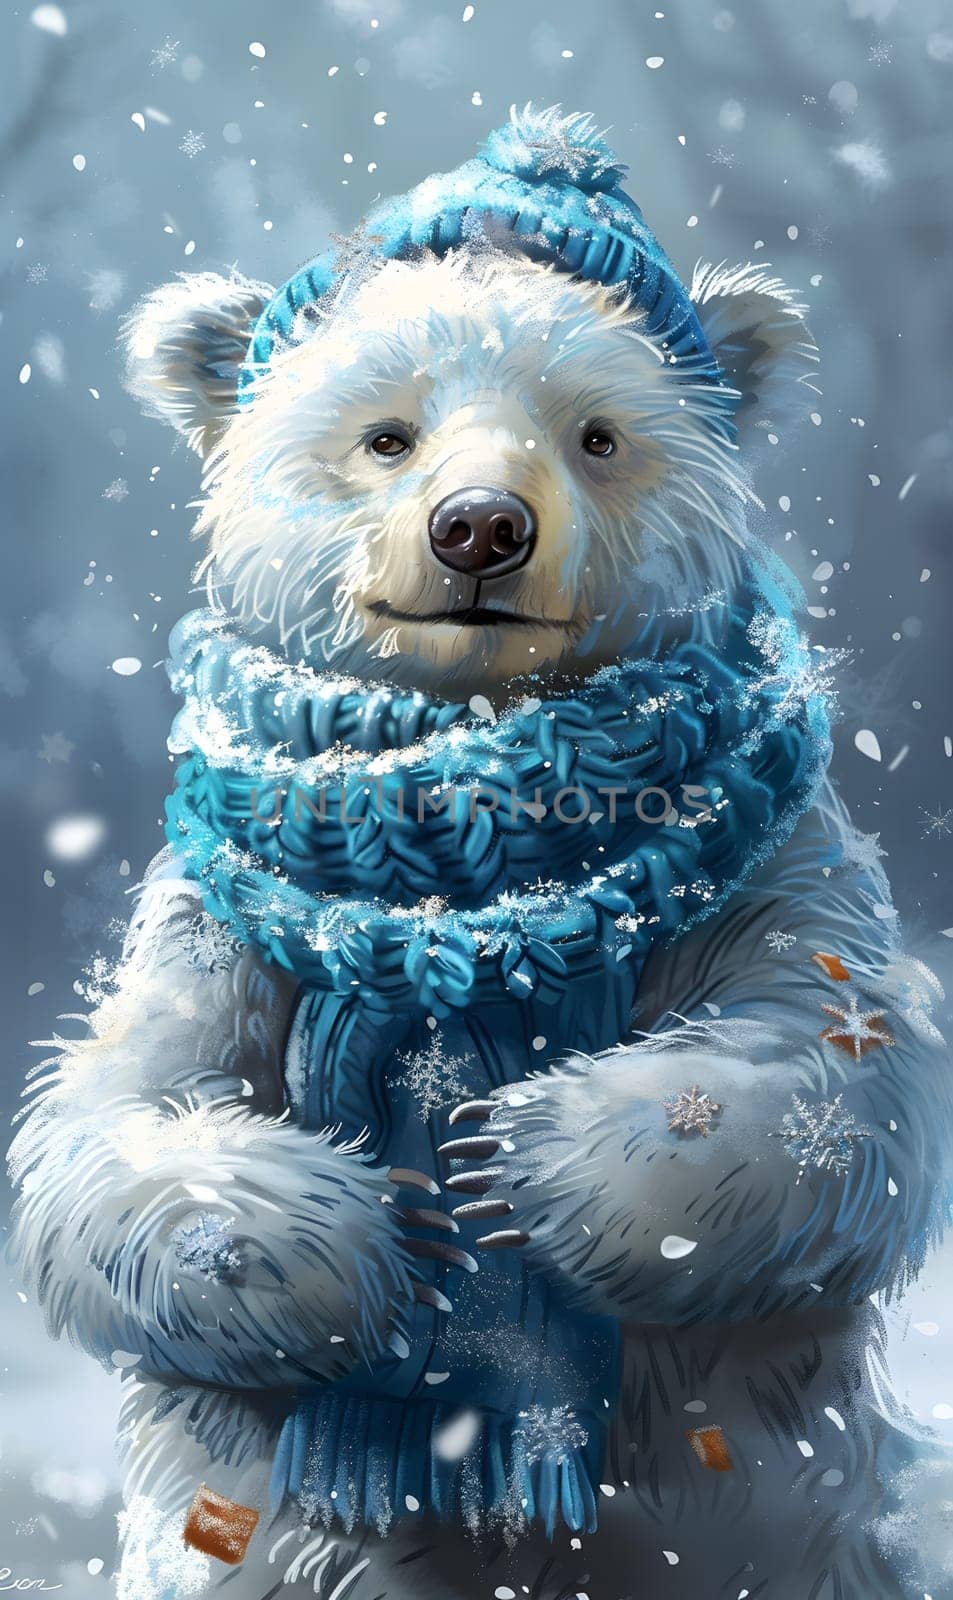 An electric blue hat and scarfclad polar bear, a carnivorous terrestrial animal, stands in the snow. Its snout glistens with fluid from the liquid it drank